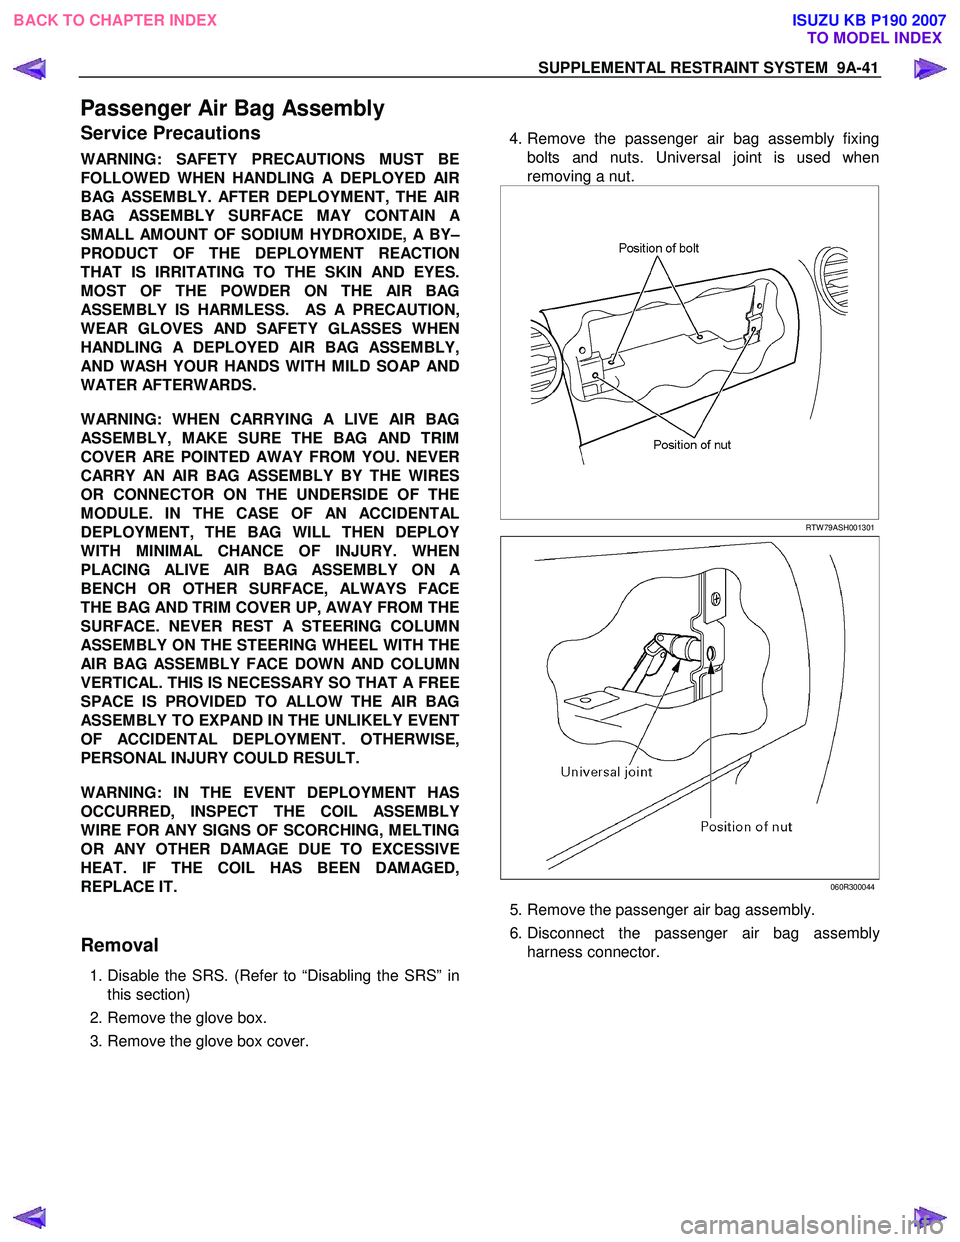 ISUZU KB P190 2007  Workshop Manual PDF SUPPLEMENTAL RESTRAINT SYSTEM  9A-41 
Passenger Air Bag Assembly 
Service Precautions 
WARNING: SAFETY PRECAUTIONS MUST BE 
FOLLOWED WHEN HANDLING A DEPLOYED AIR
BAG ASSEMBLY. AFTER DEPLOYMENT, THE AI